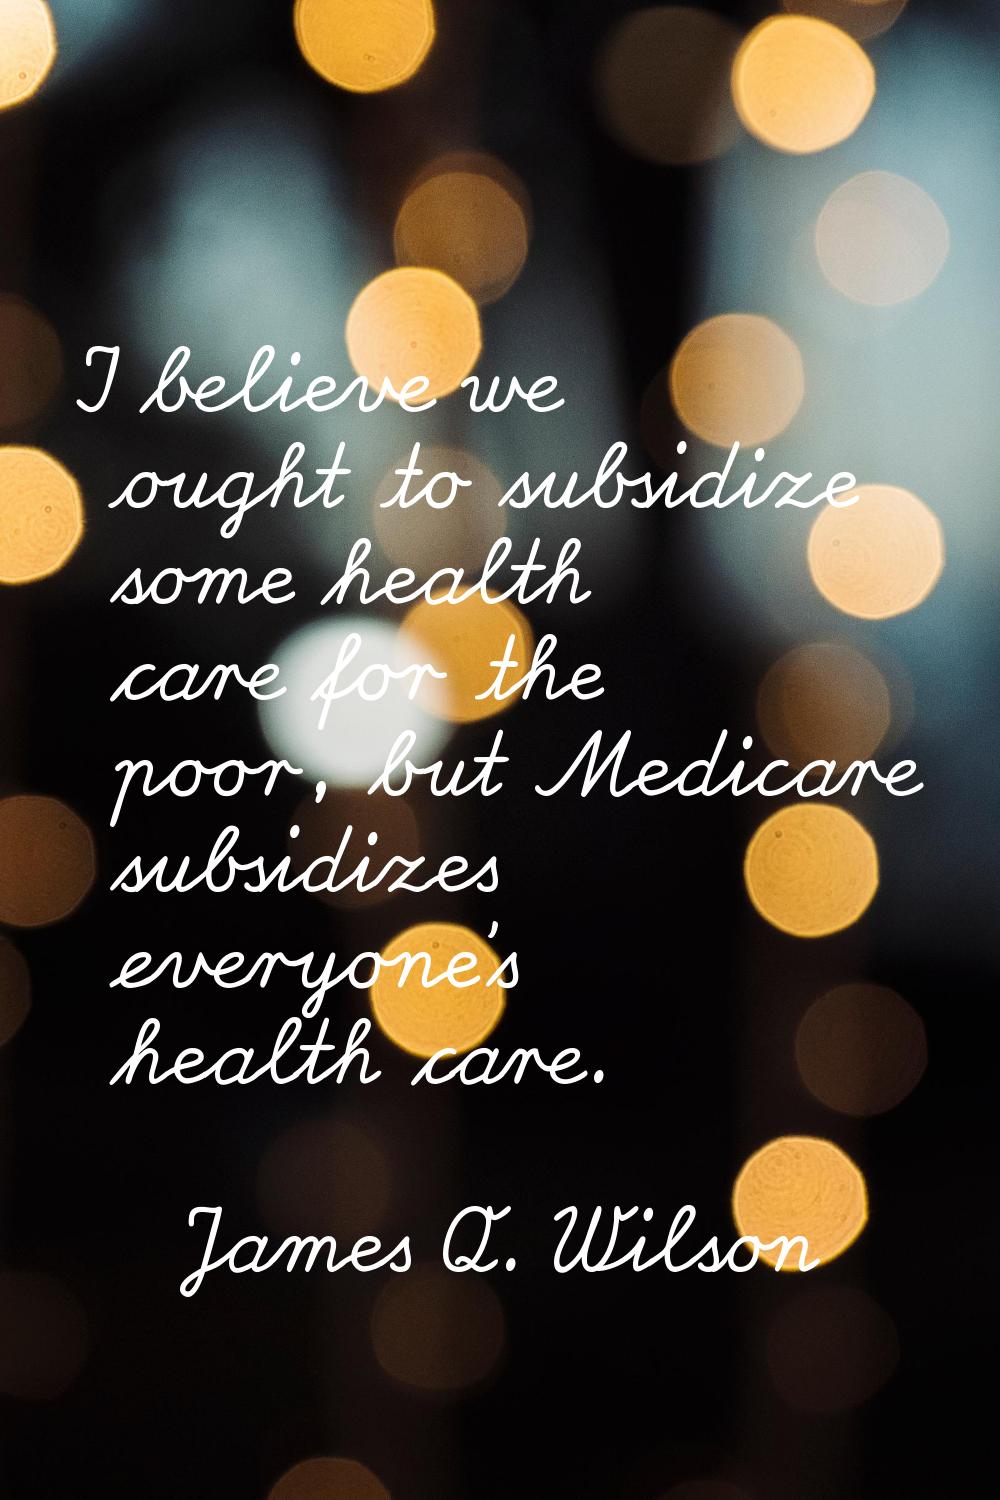 I believe we ought to subsidize some health care for the poor, but Medicare subsidizes everyone's h